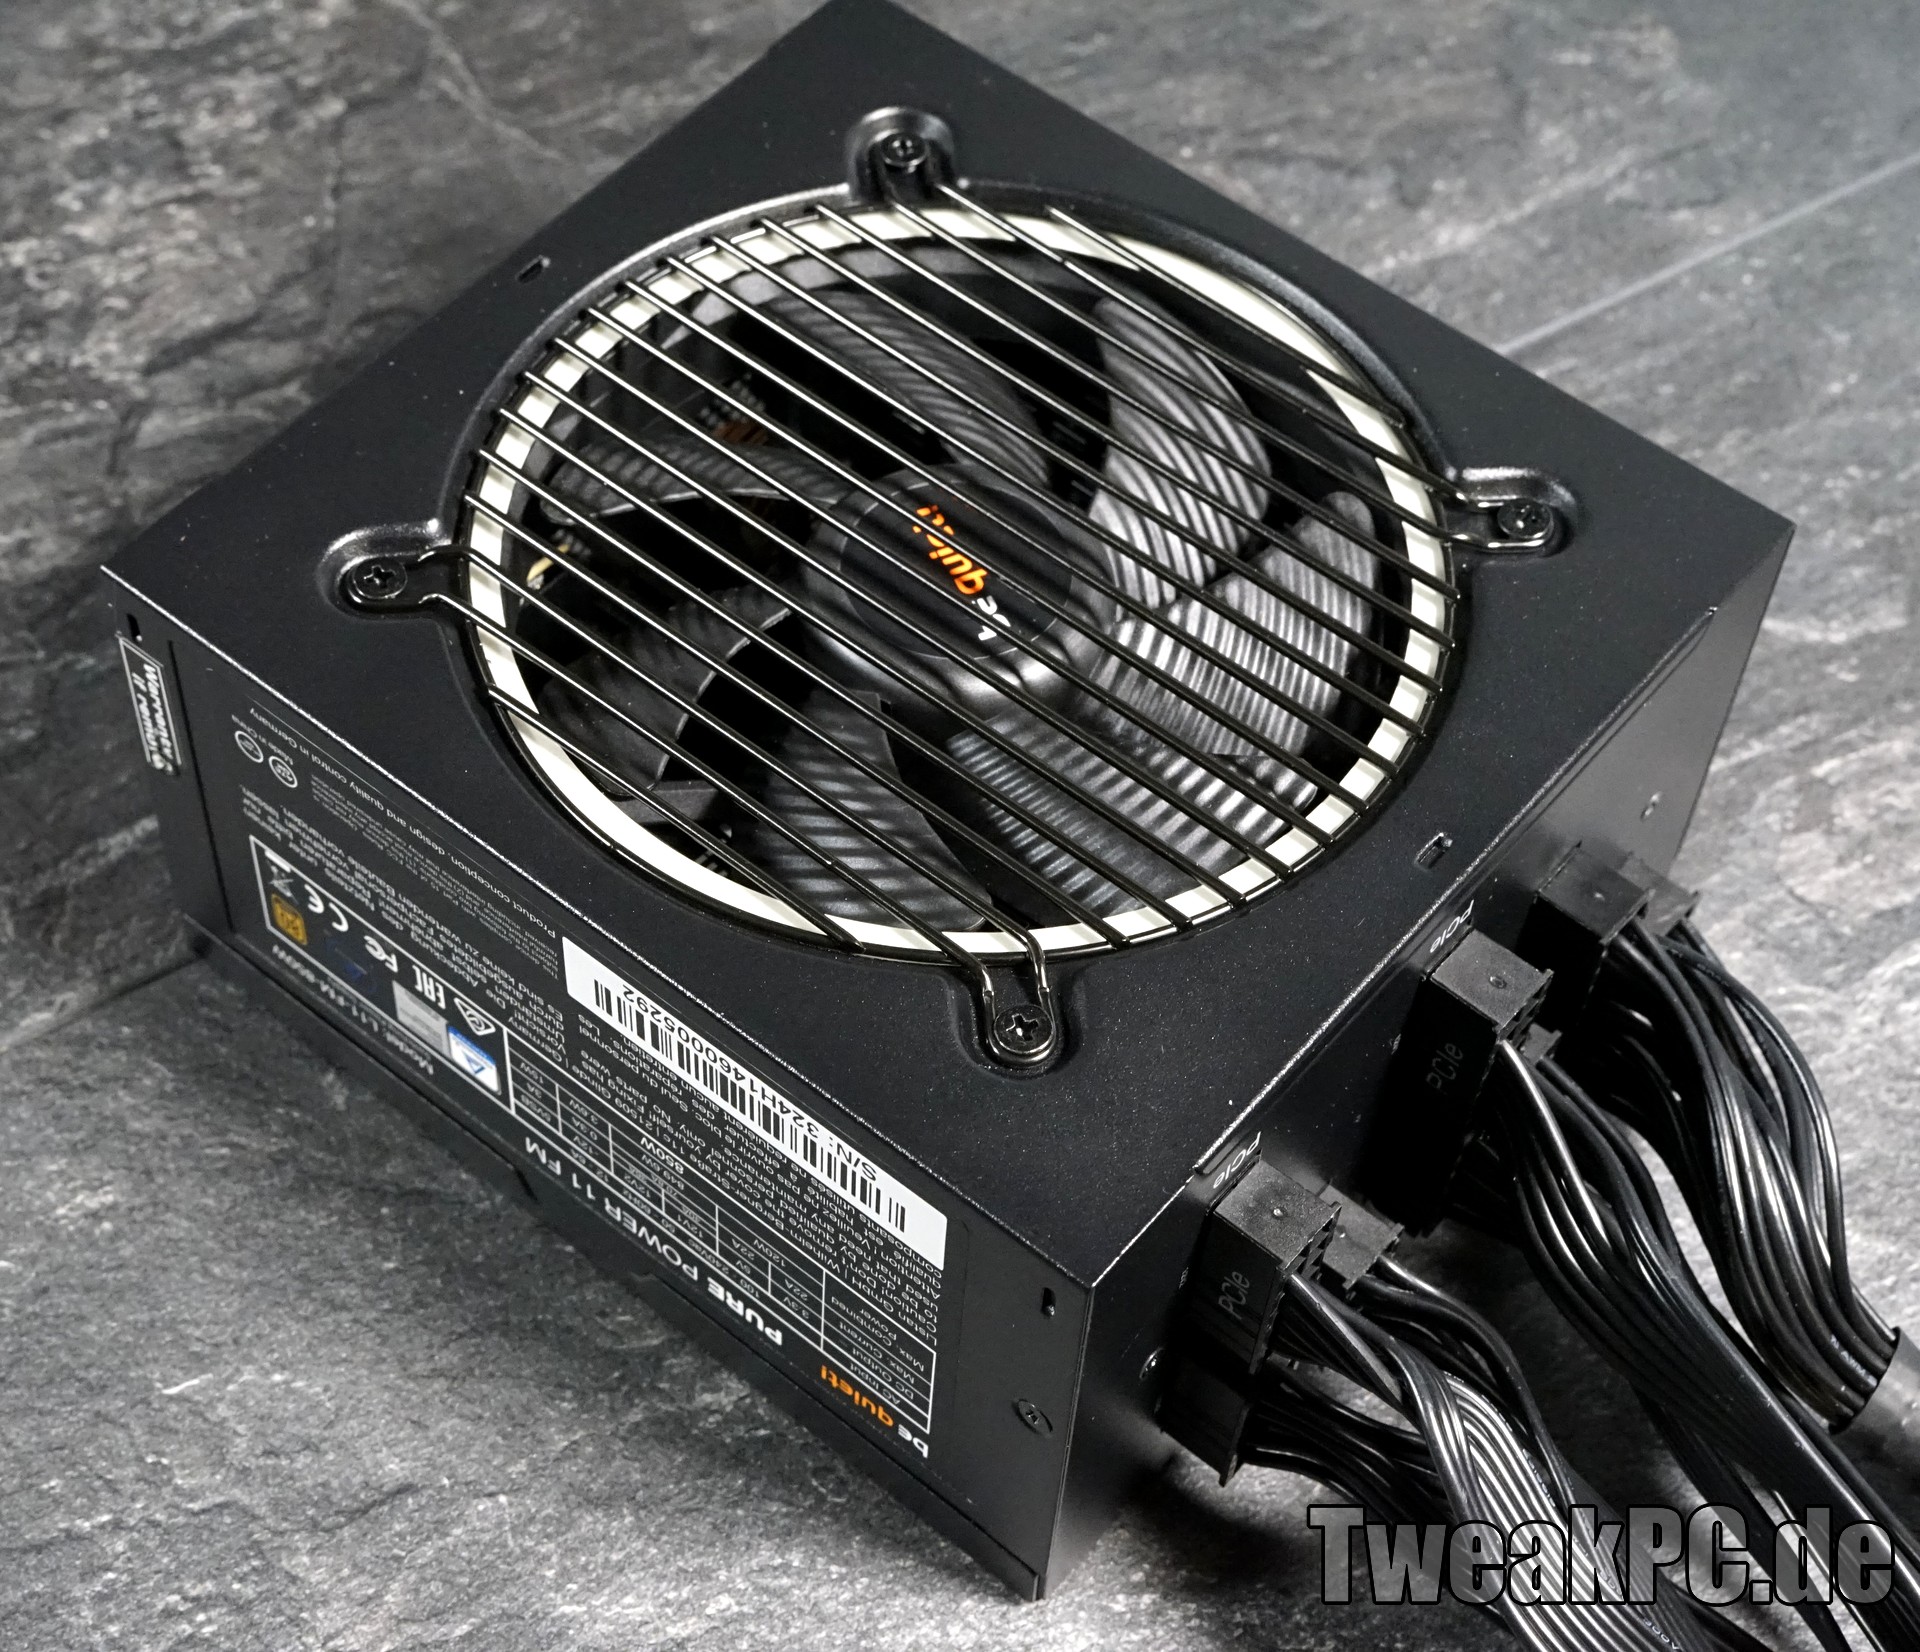 be quiet! Pure Power 11 FM 850 W Review